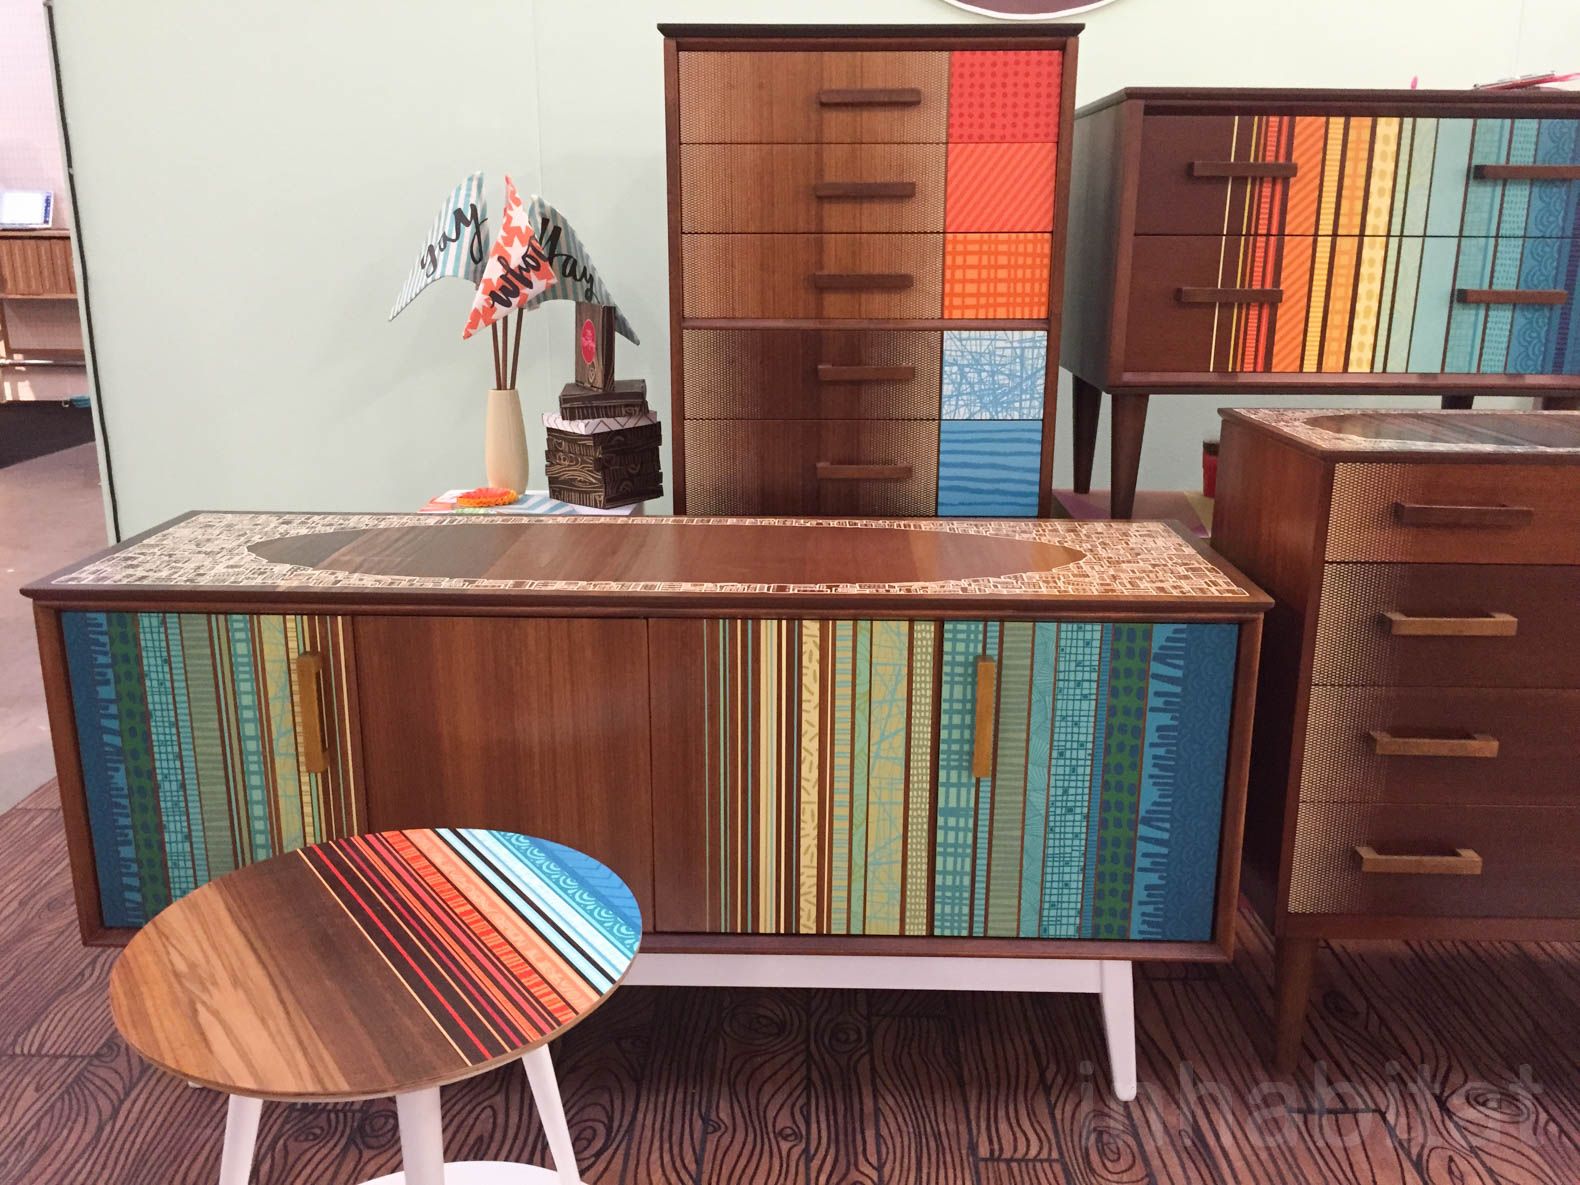 Upcycled Furniture: Unique Pieces For A Personalized Home